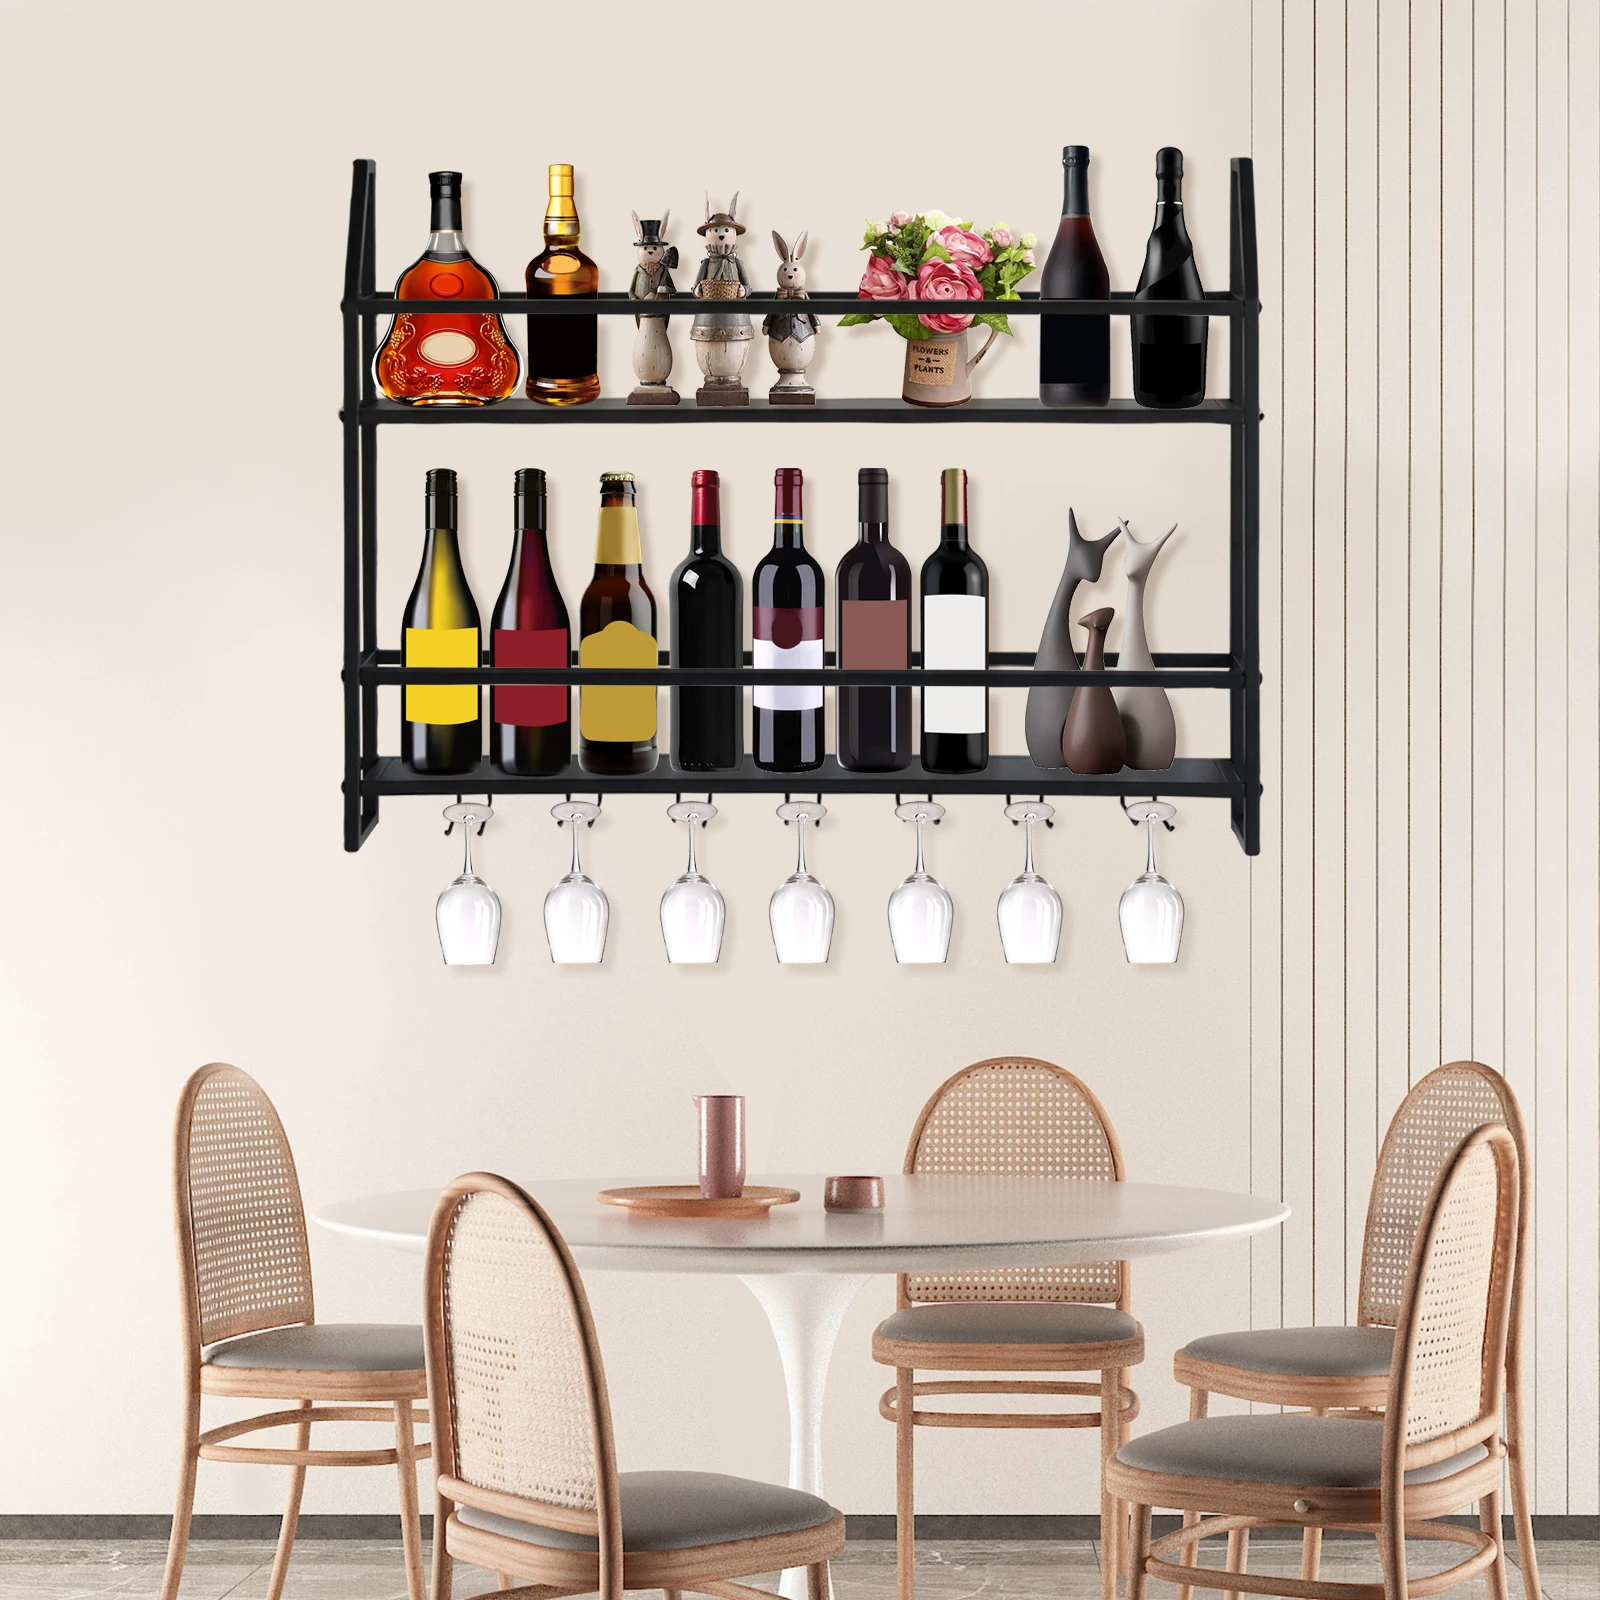 

Wall Mounted Iron Wine Rack Bottle Champagne Glass Holder Shelves Bar Home Party Light and Strong Durable Unique Design Decor